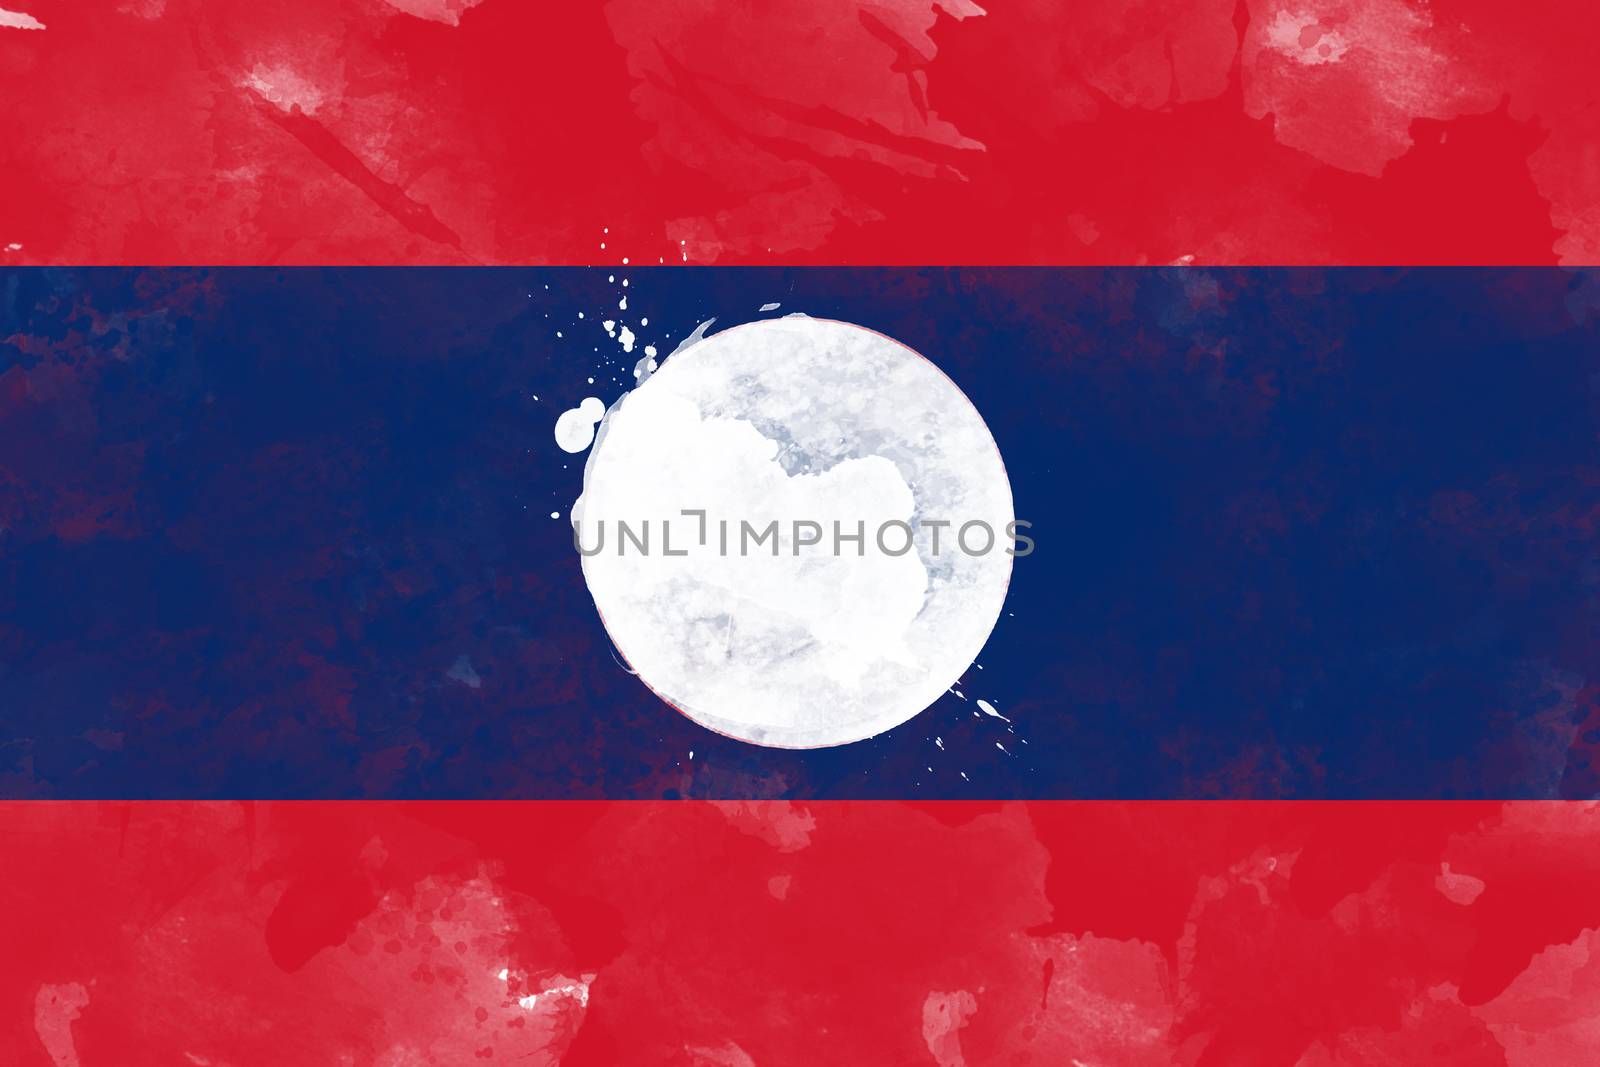 Flag of Laos by watercolor paint brush, grunge style